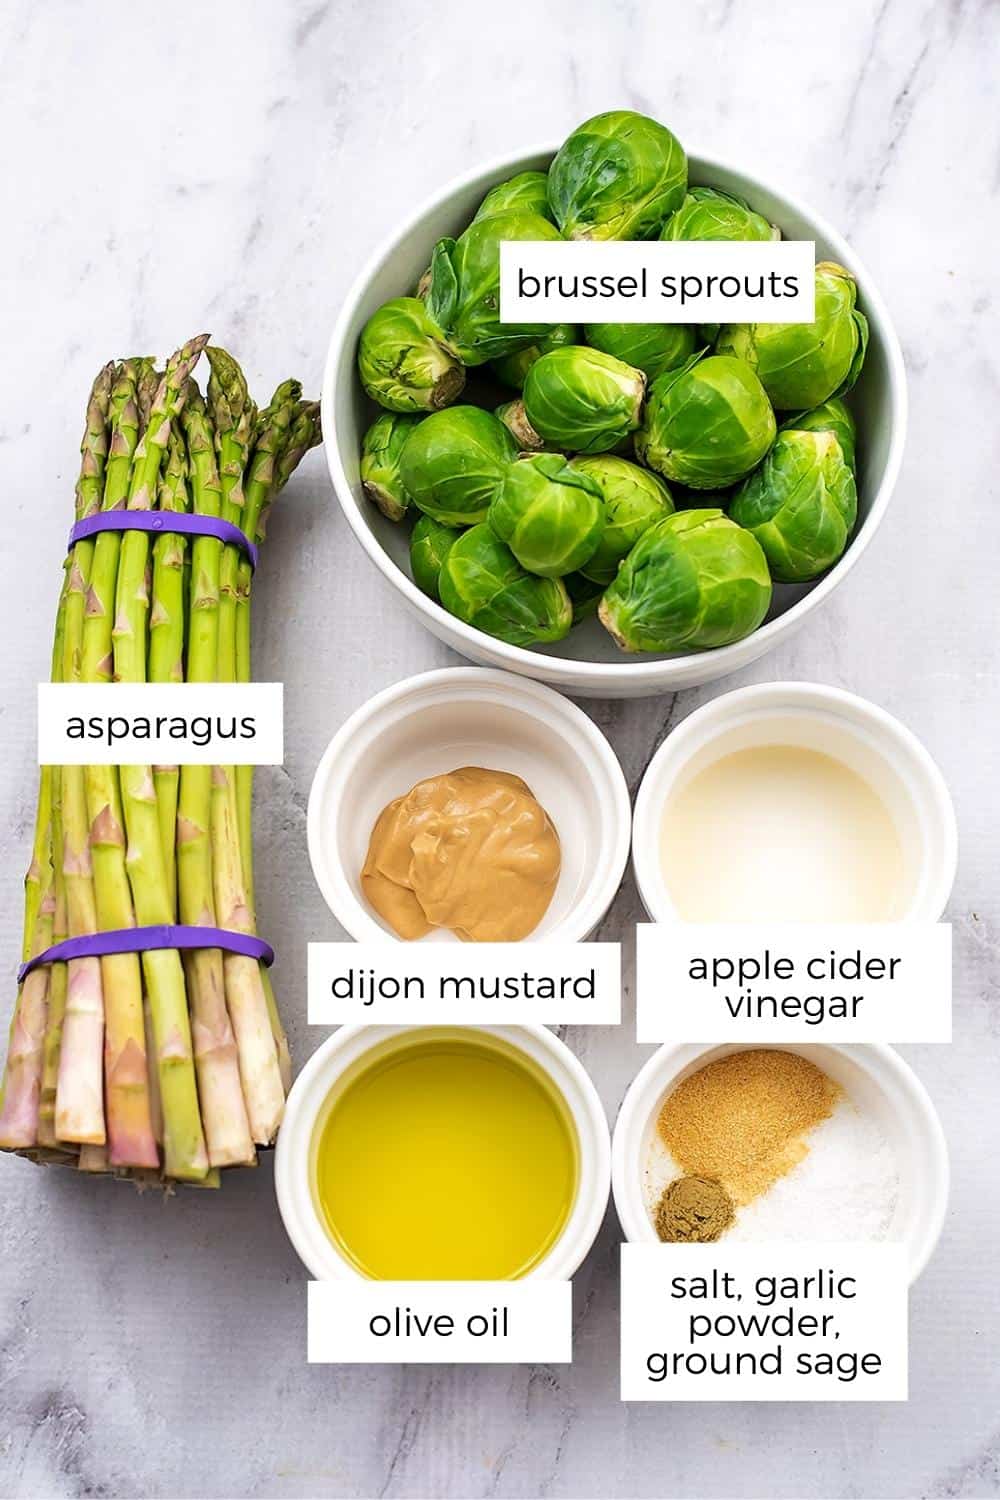 Roasted asparagus and brussel sprouts ingredients.